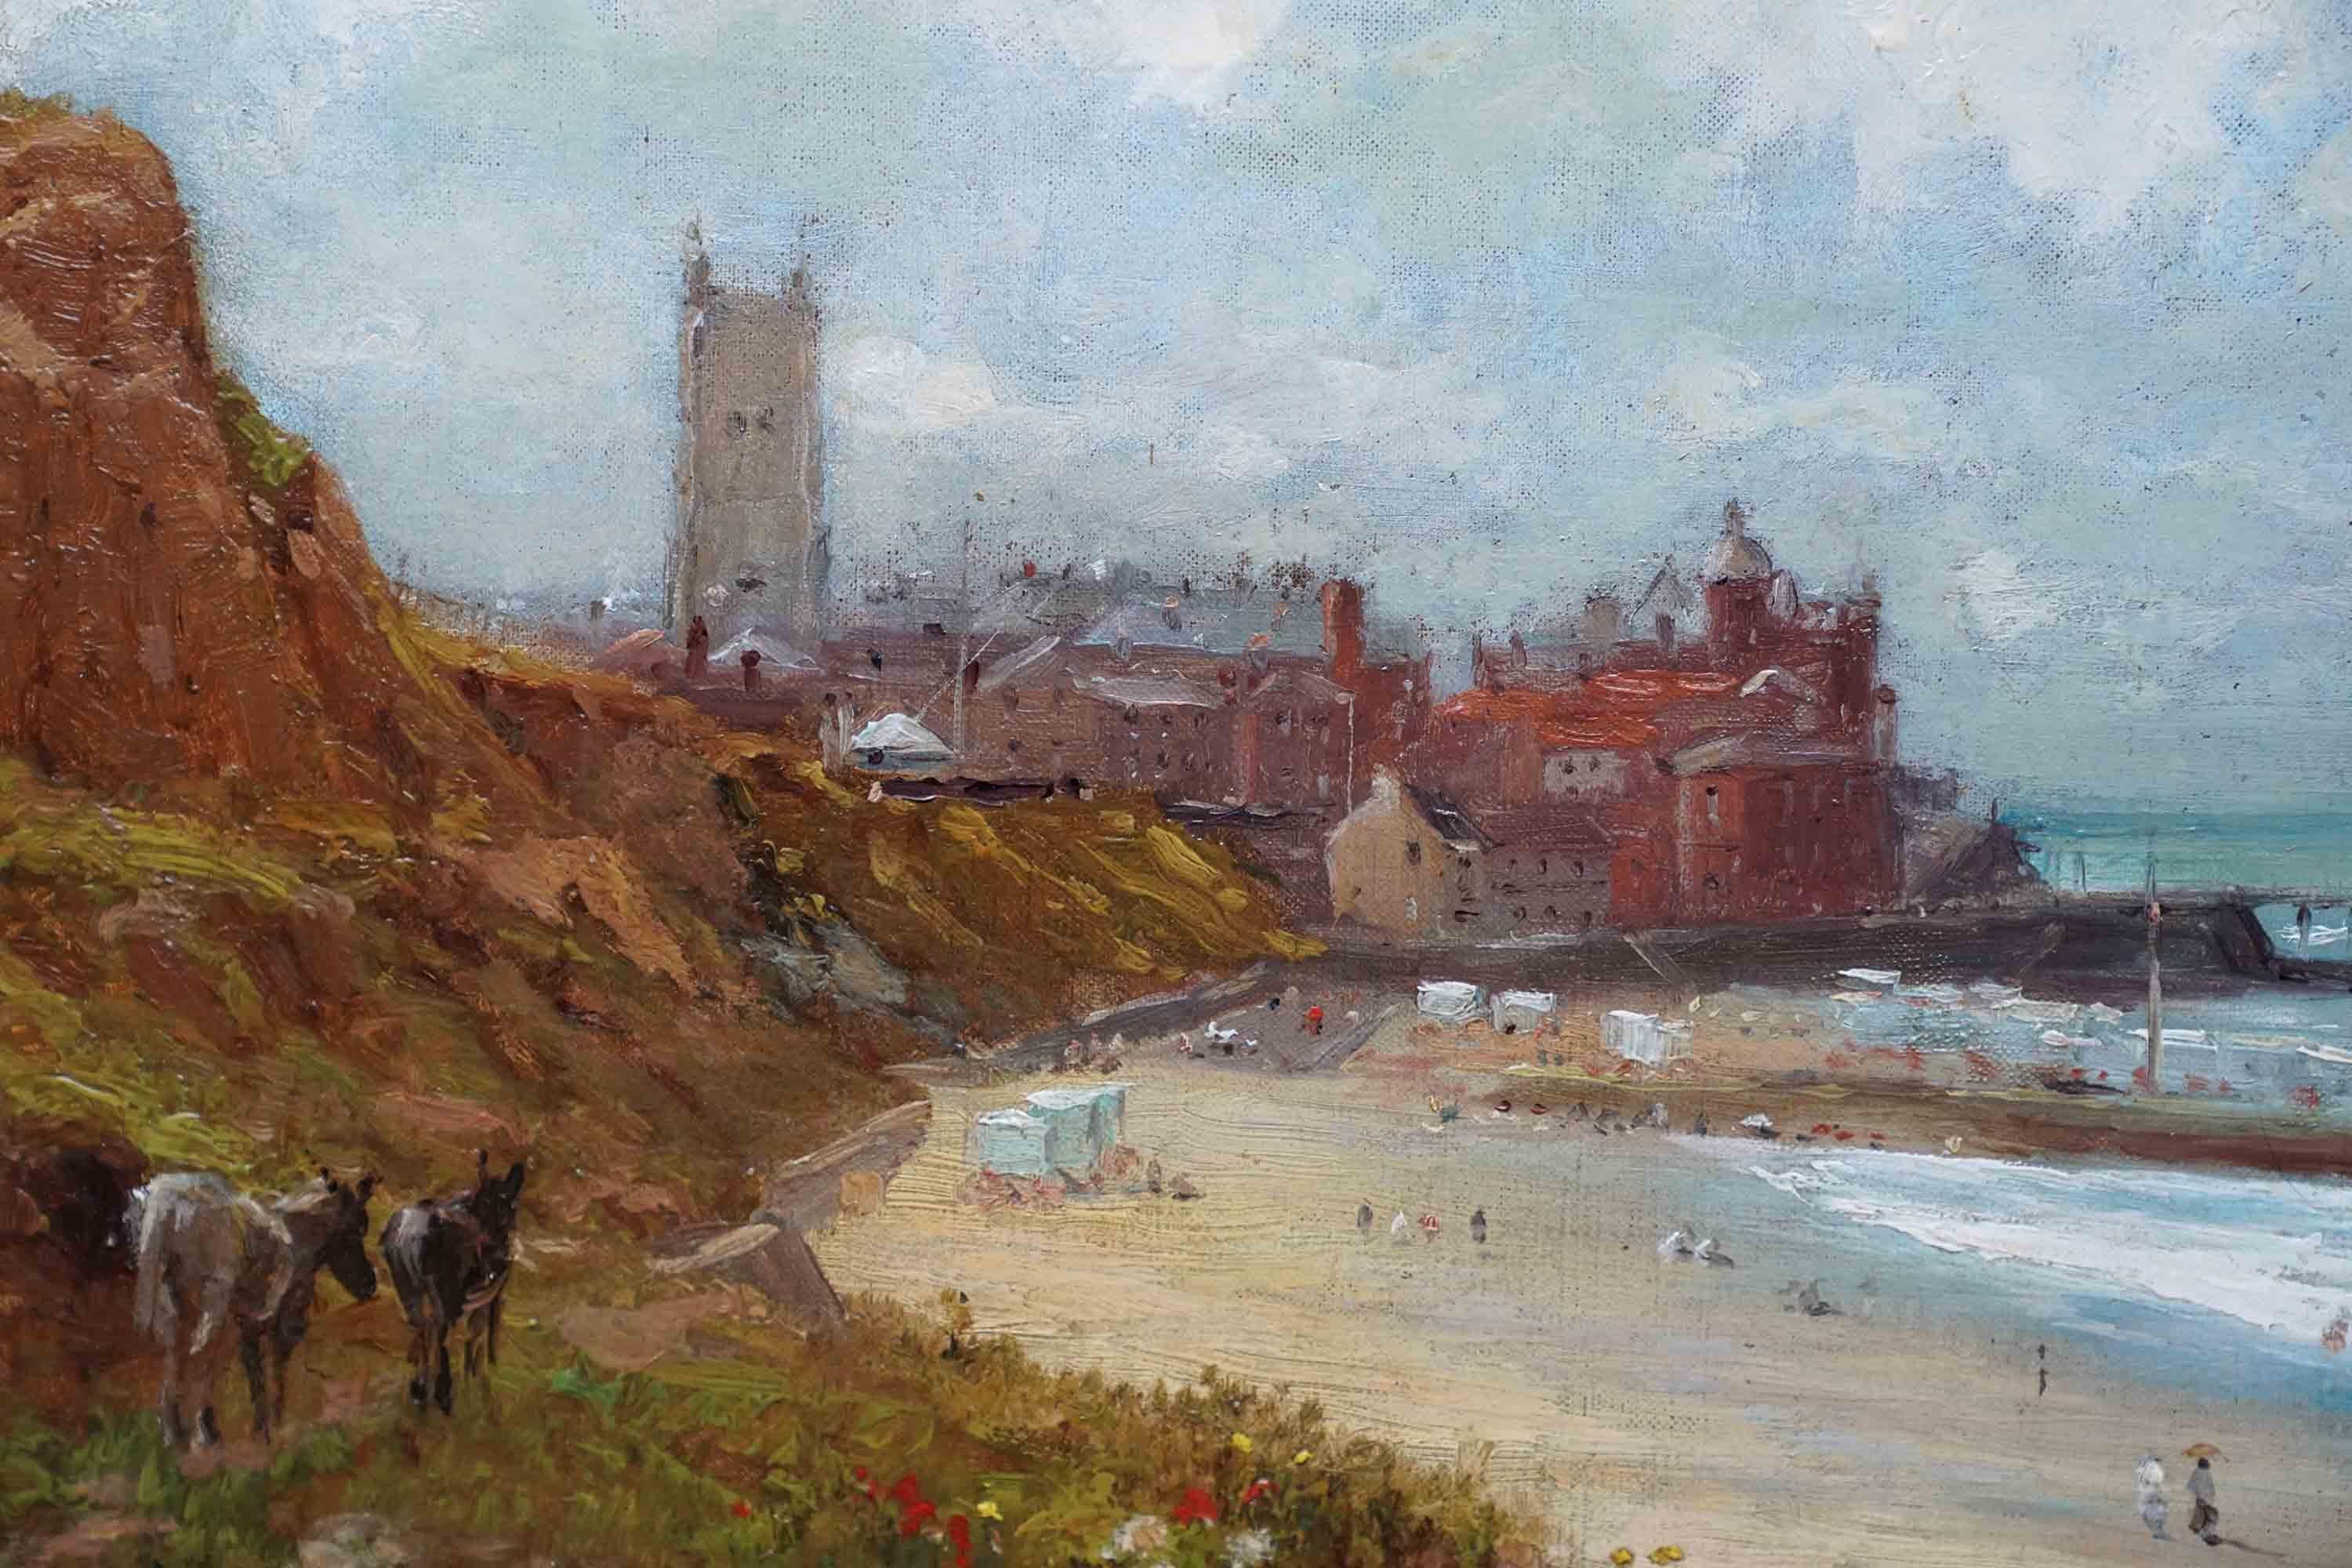 his lovely British Impressionist  19th century coastal landscape oil painting is by noted artist Robert Finlay McIntyre. Painted circa 1880 it is a view along the beach from part way down the cliffs towards Cromer, Norfolk. One can clearly see the